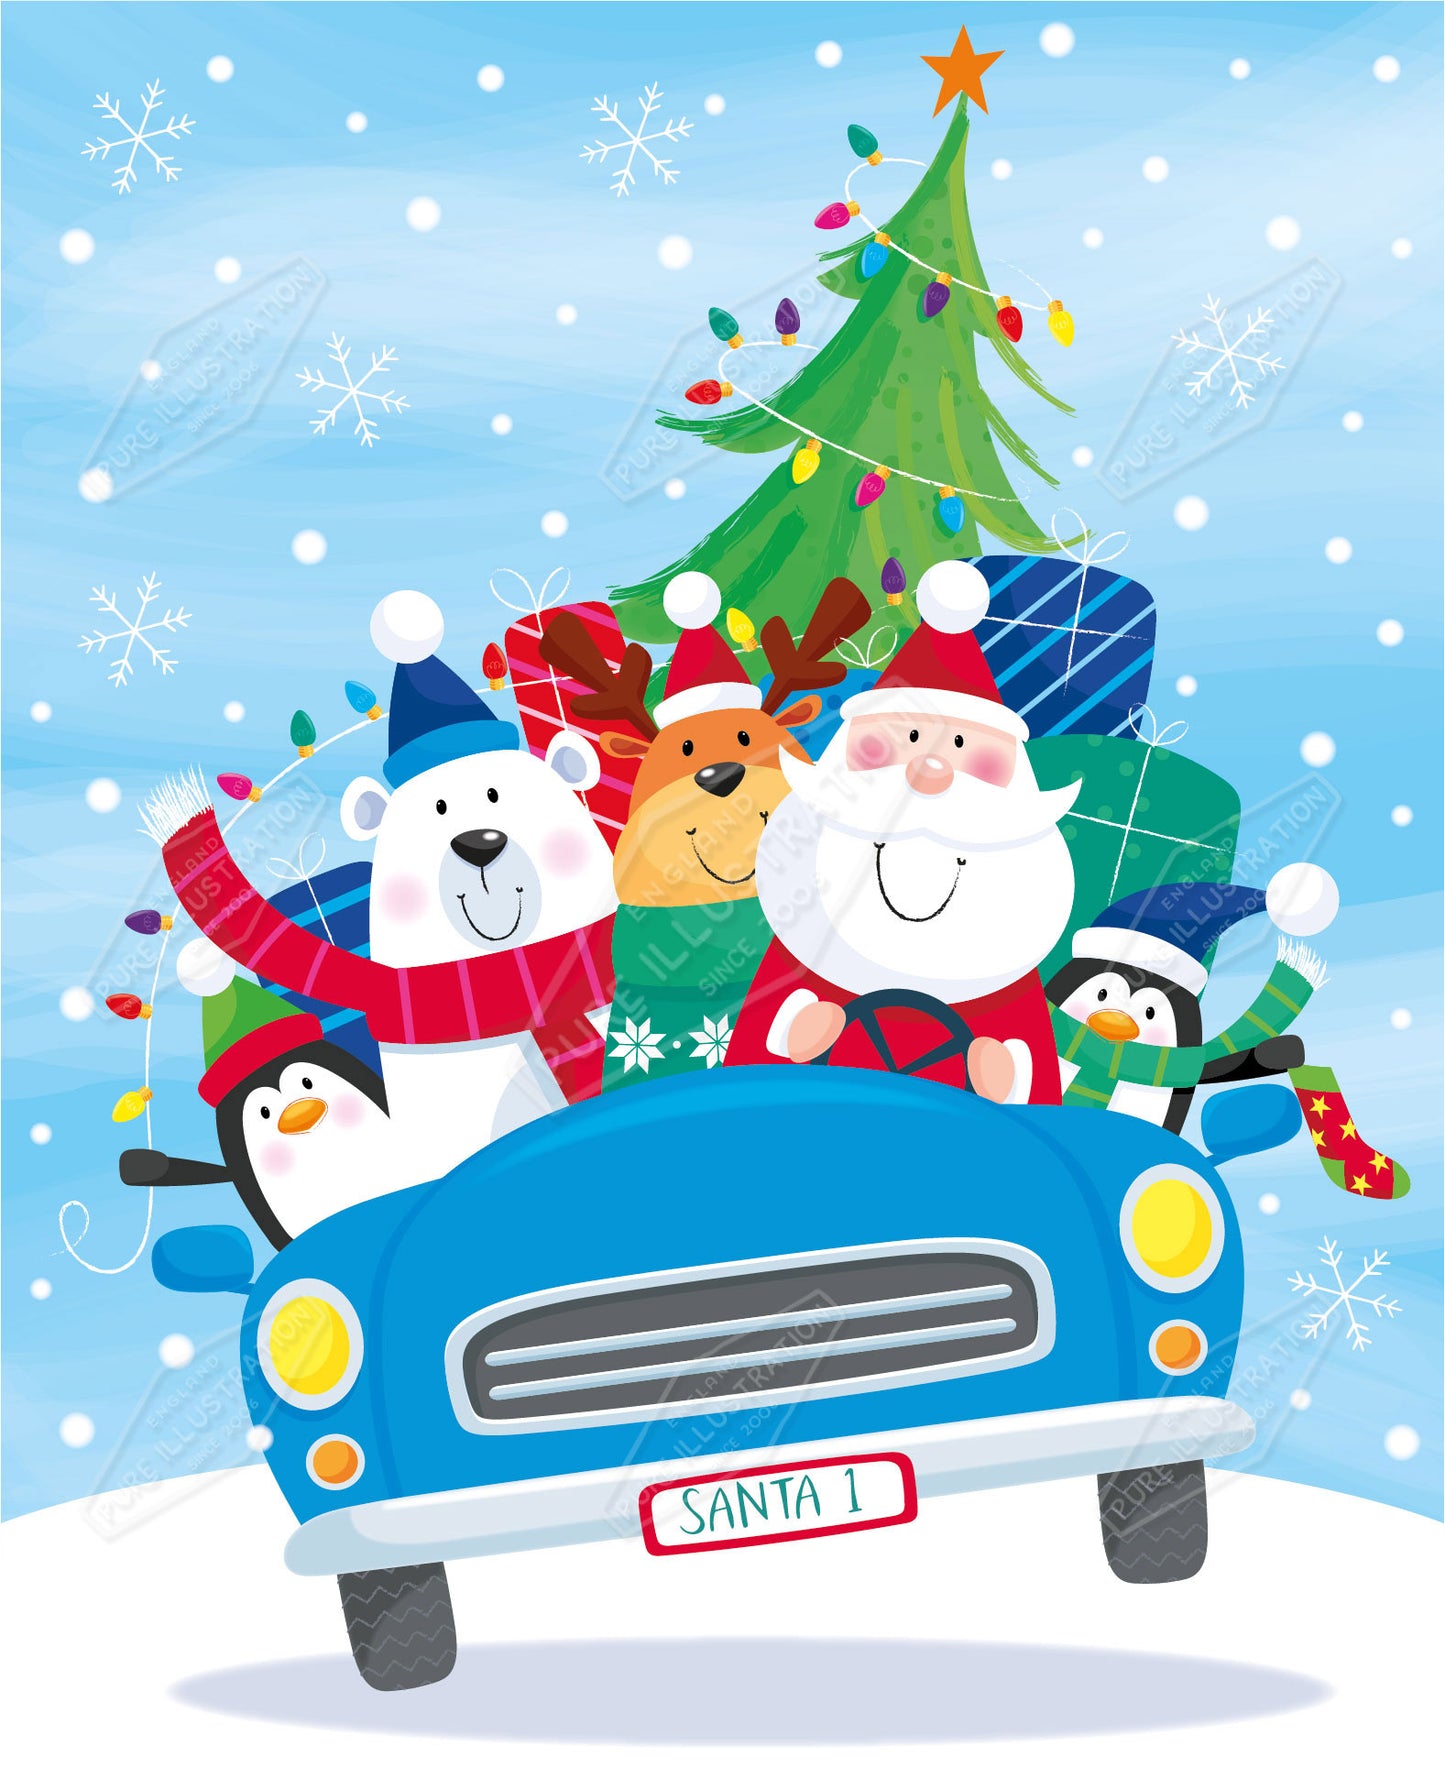 00035579SPI- Sarah Pitt is represented by Pure Art Licensing Agency - Christmas Greeting Card Design